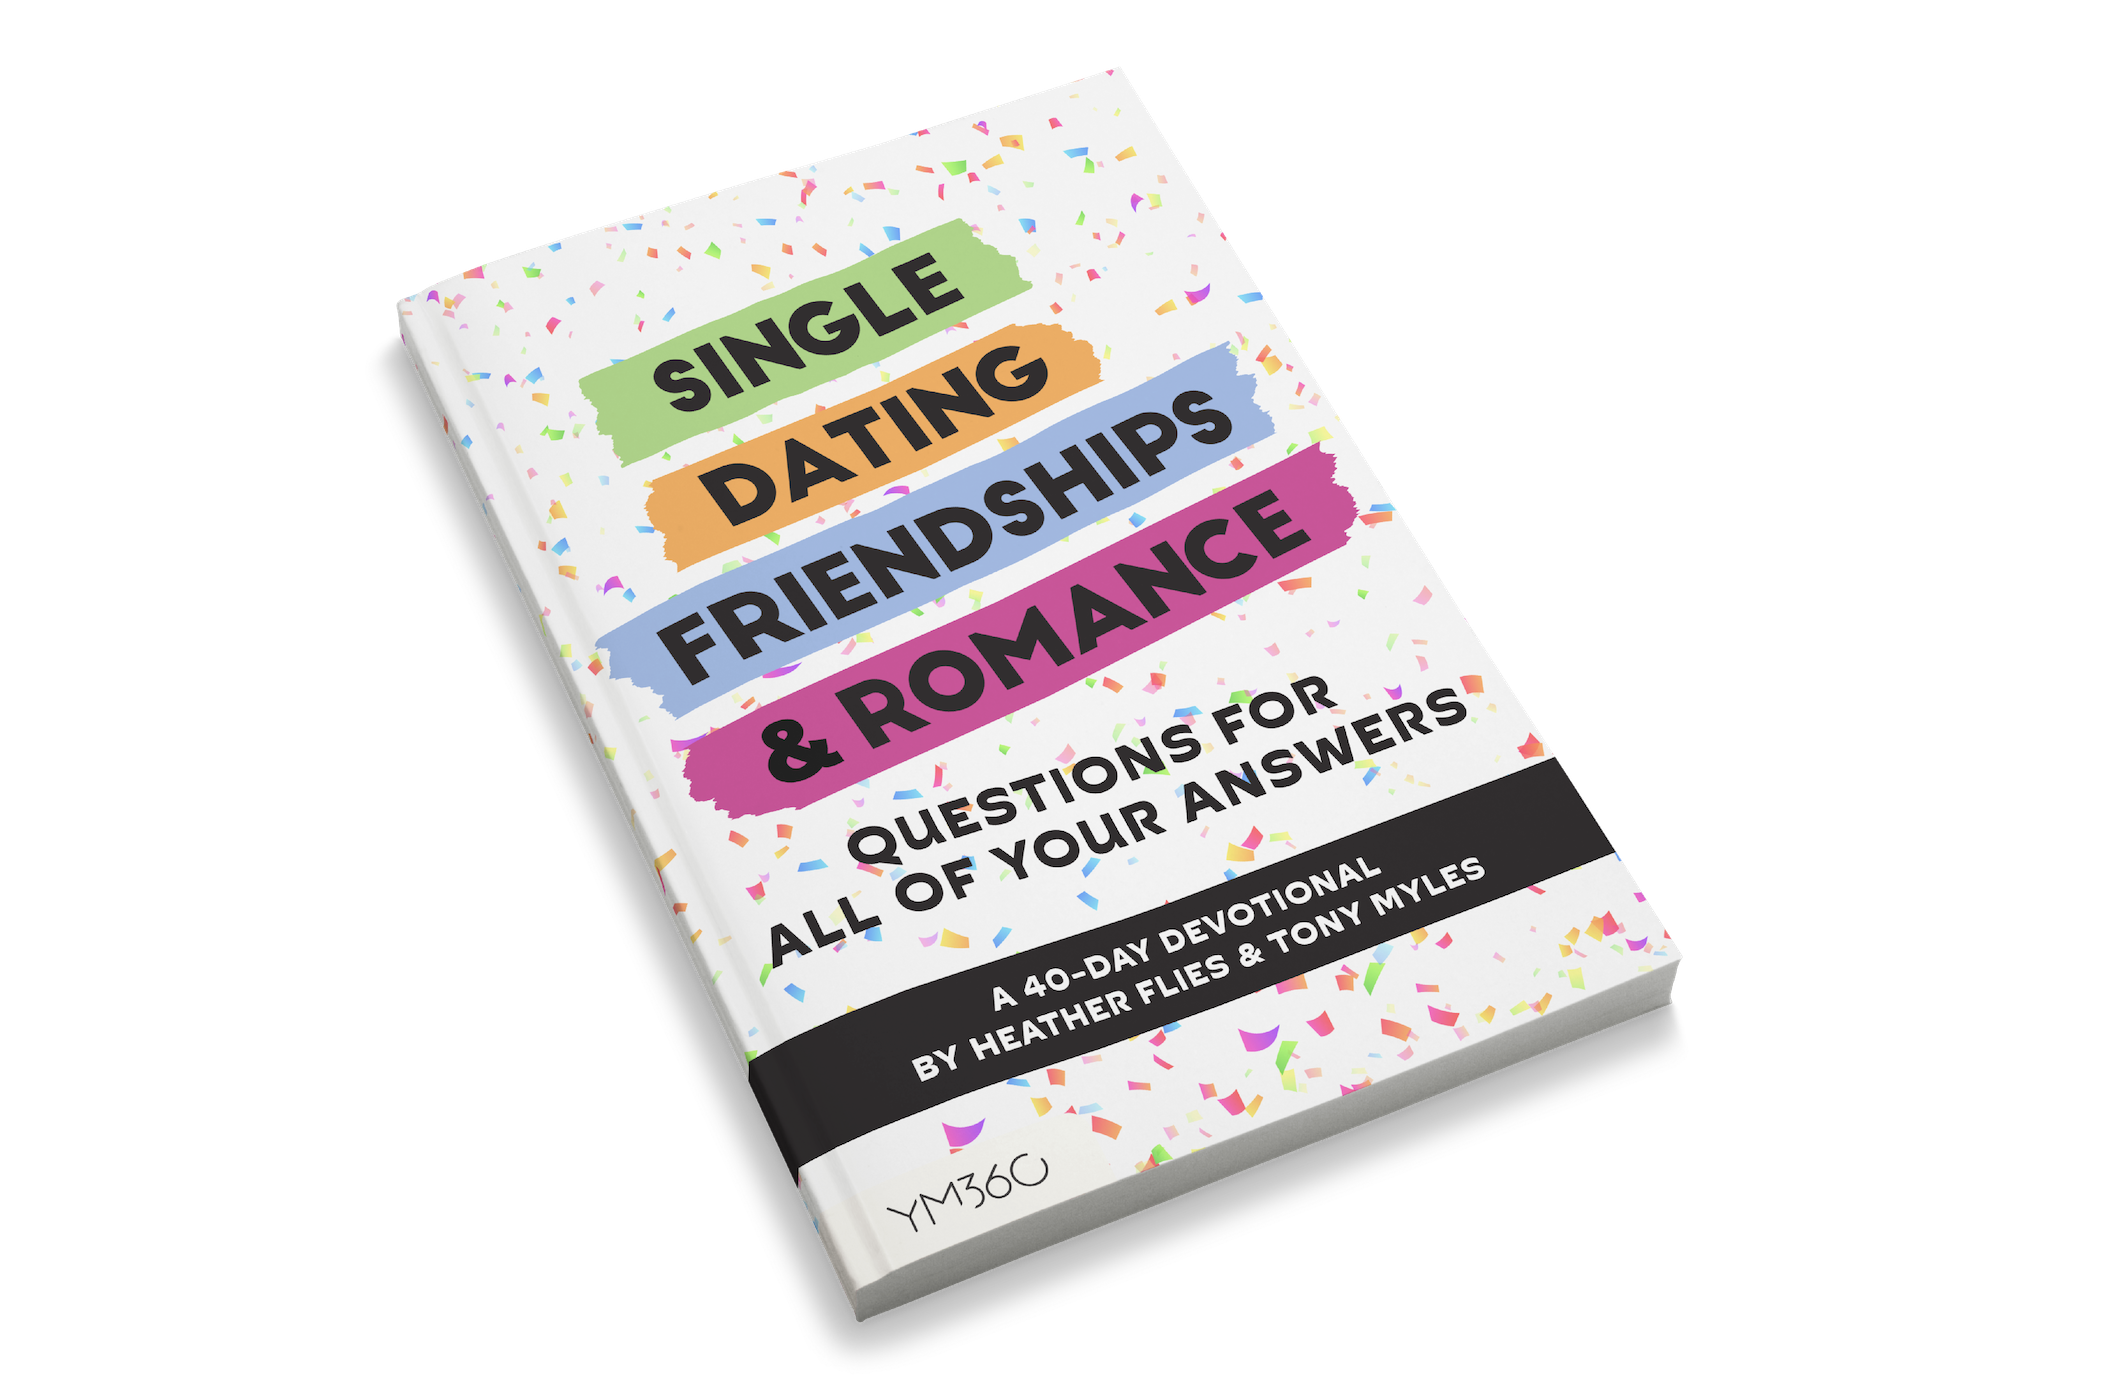 Single, Dating, Friendships, and Romance: Questions for All of Your Answers